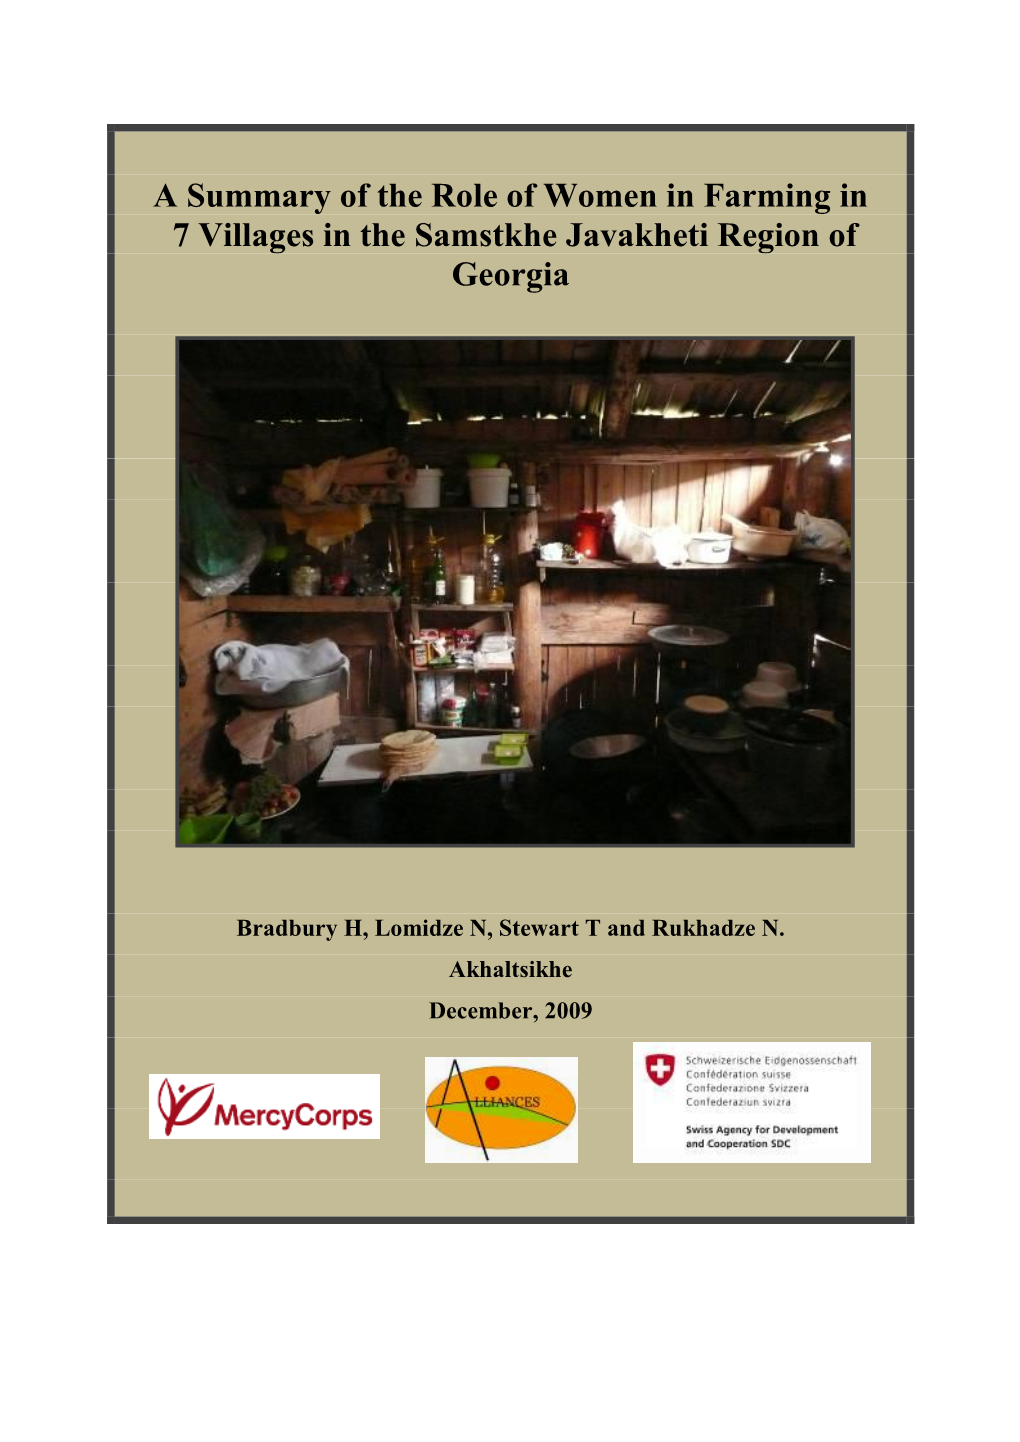 A Summary of the Role of Women in Farming in 7 Villages in the Samstkhe Javakheti Region of Georgia